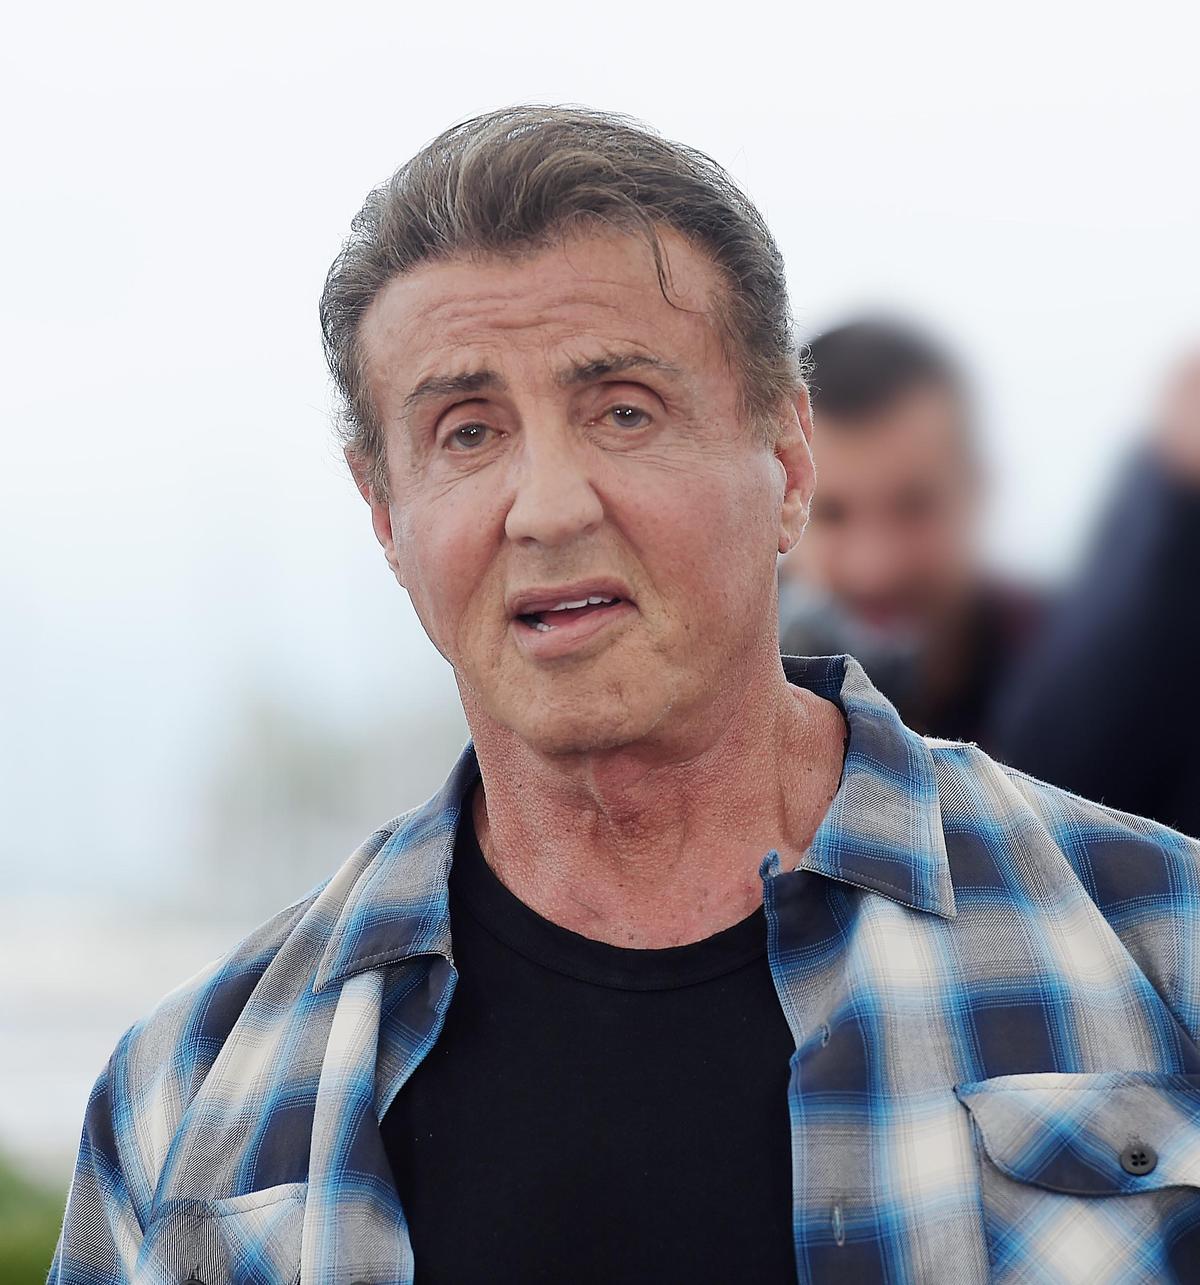 Sylvester Stallone attends the photocall for Sylvester Stallone & Rambo V: Last Blood during the 72nd annual Cannes Film Festival on May 24, 2019, in Cannes, France. (Antony Jones/Getty Images)